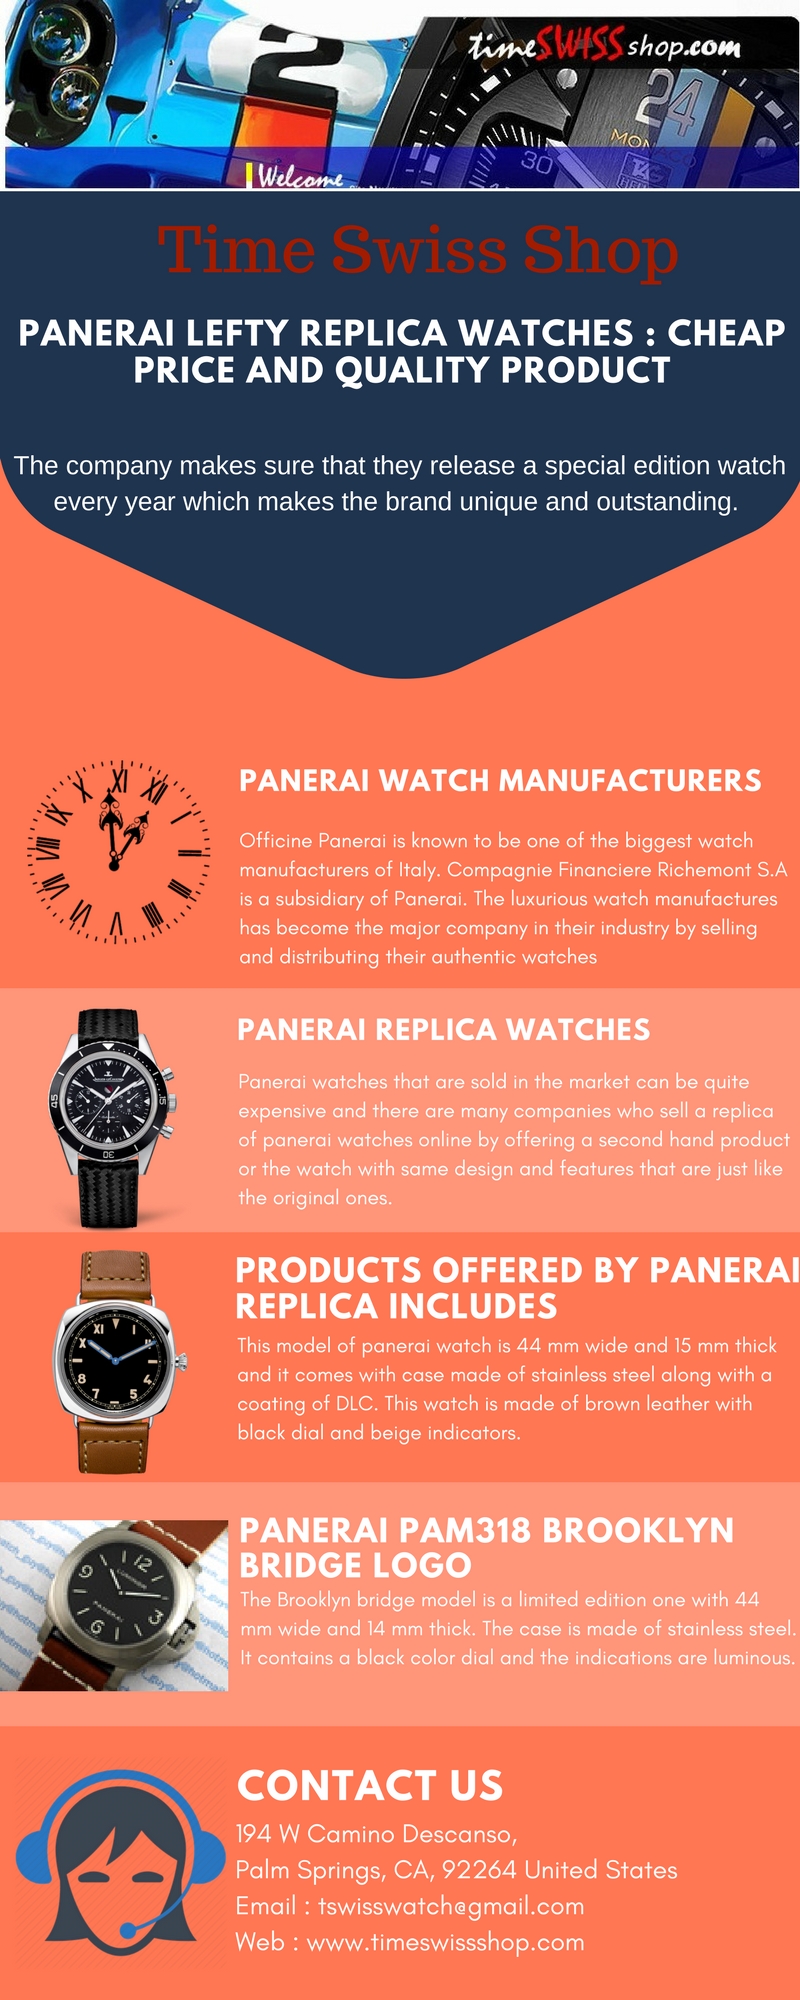 Panerai Lefty Replica TimeSwissShop is a reliable online replica watch store to buy high quality swiss panerai titanium replica watches, 6497 movement and panerai lefty replica watches. For more info at http://www.timeswissshop.com
 by Timeswissshop